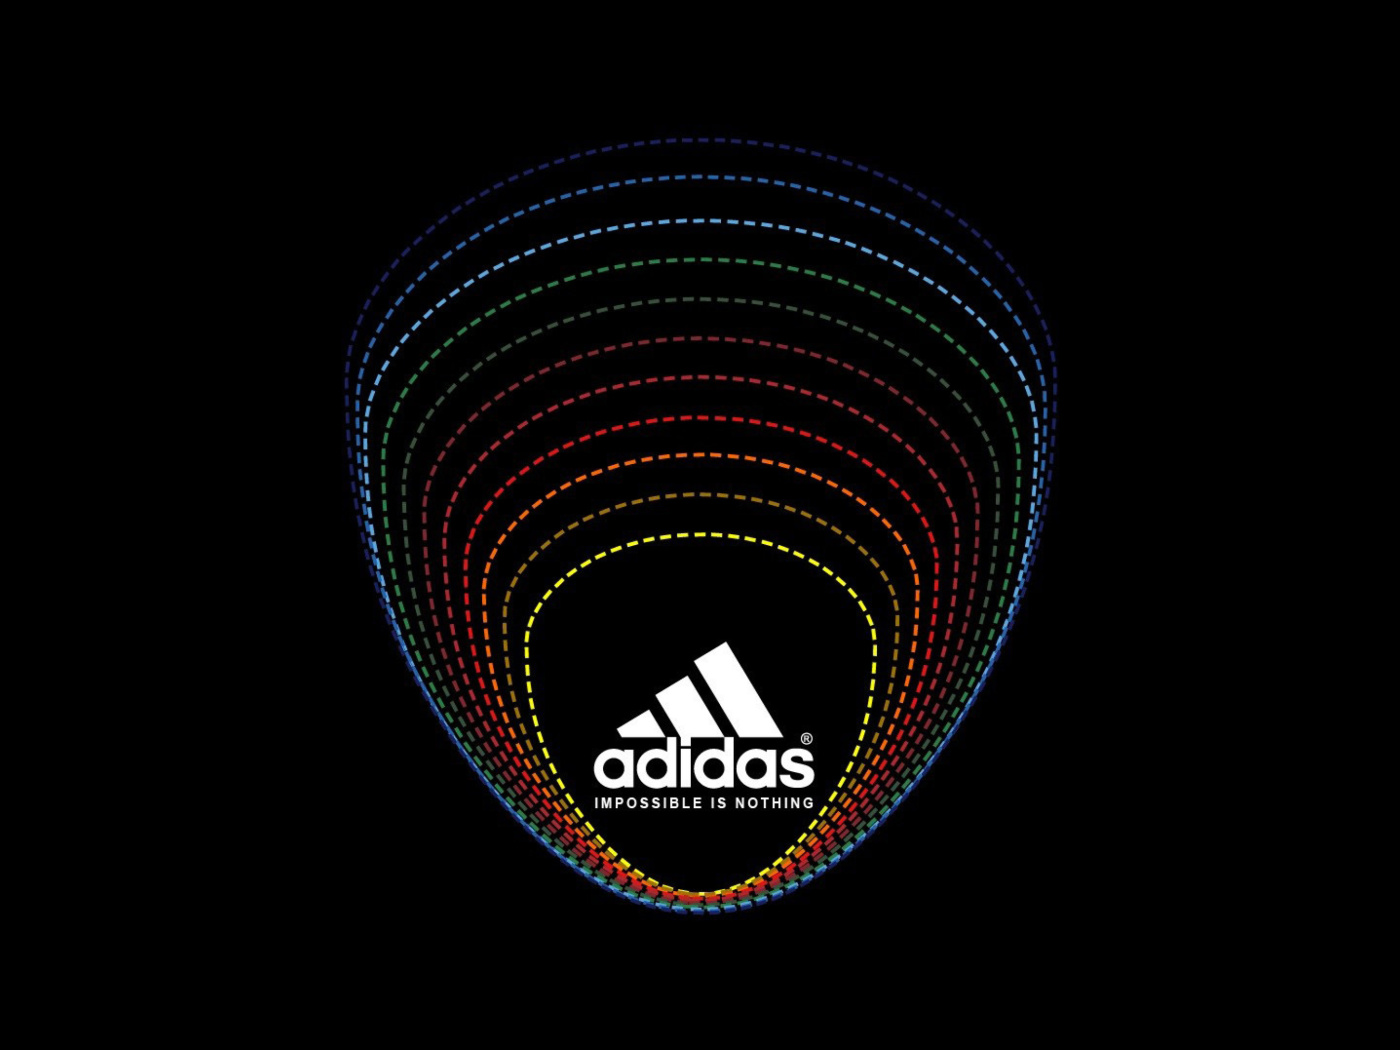 Adidas Tagline, Impossible is Nothing screenshot #1 1400x1050